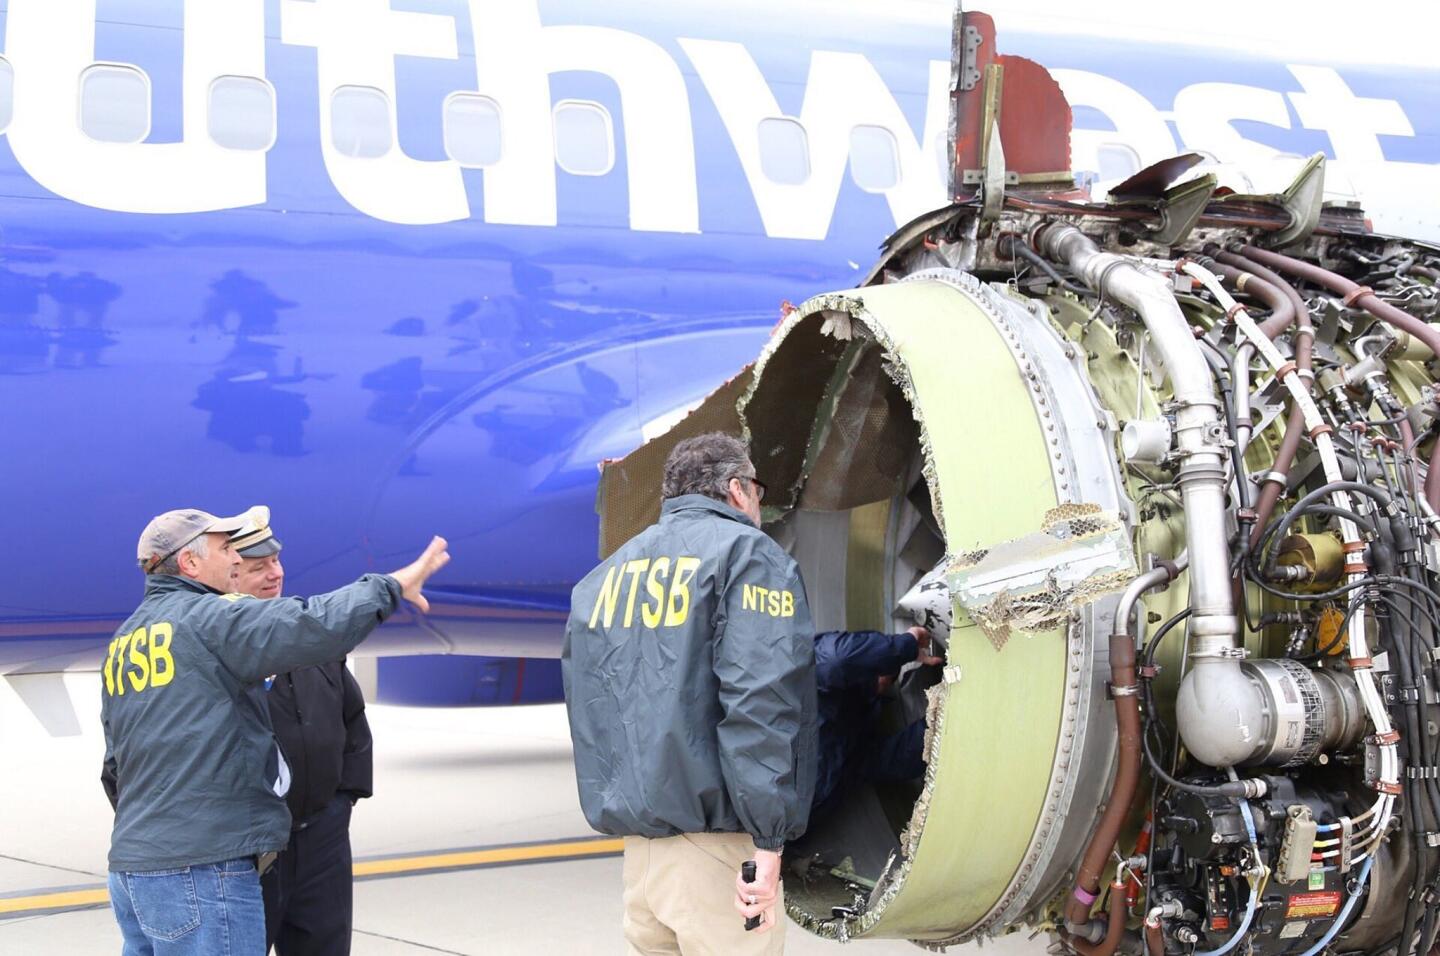 A handout photo made available by the National Transportation Safety Board shows investigators examining the damaged engine of Southwest Airlines flight 1380 which was en route from LaGuardia Airport in New York City to Love Field in Dallas, Texas when it exploded in flight sending shrapnel into the fuselage, breaking a window and causing the plane to make an emergency landing at Philadelphia Airport in Philadelphia, Pennsylvania, USA, 17 April 2018.